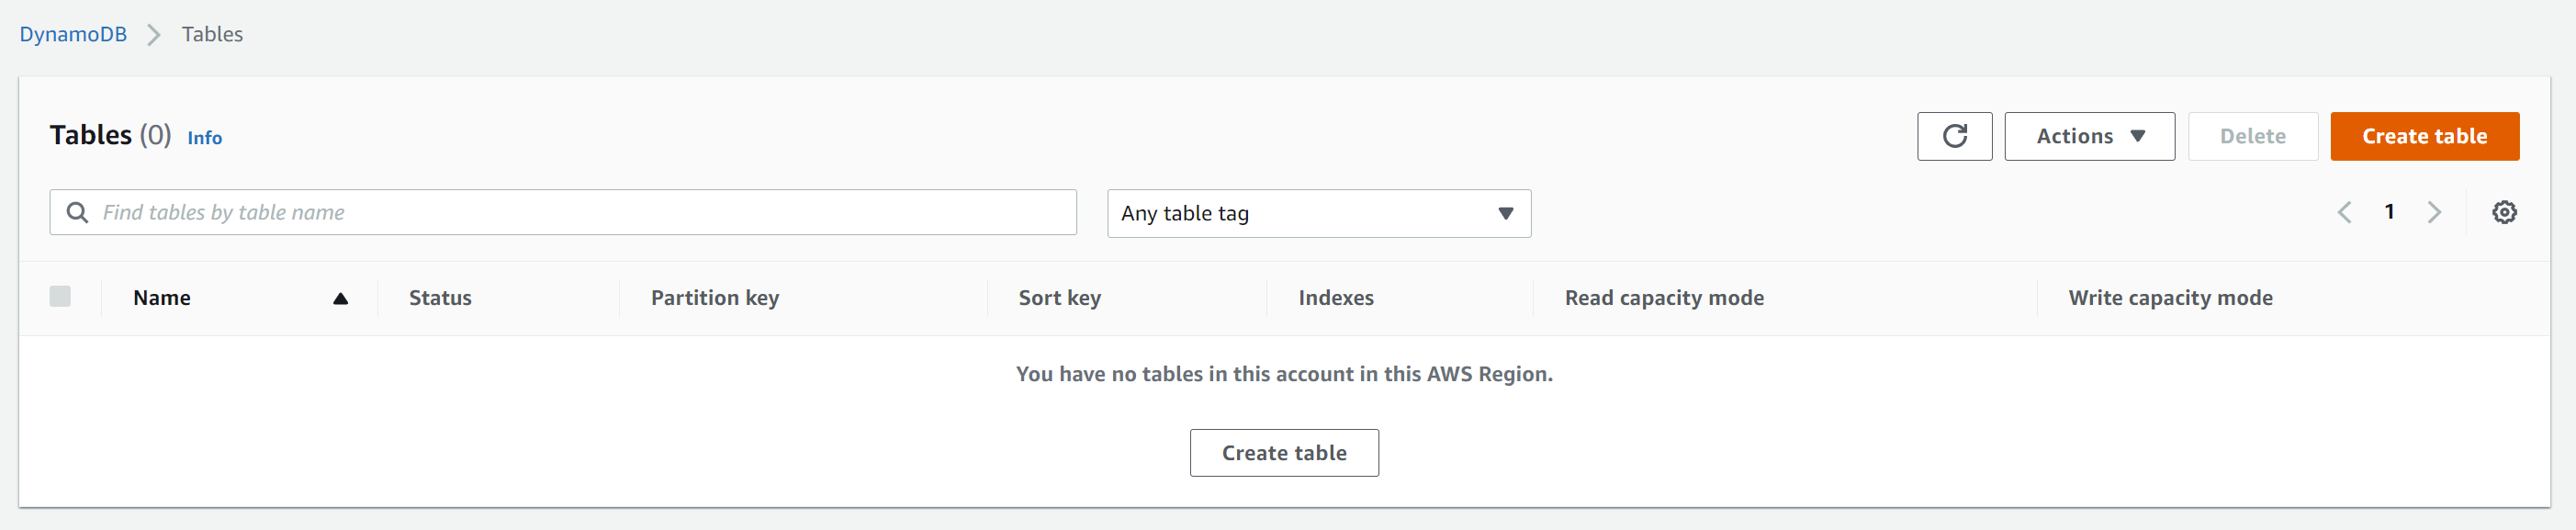 How to setup a Create a DynamoDB Table in AWS console